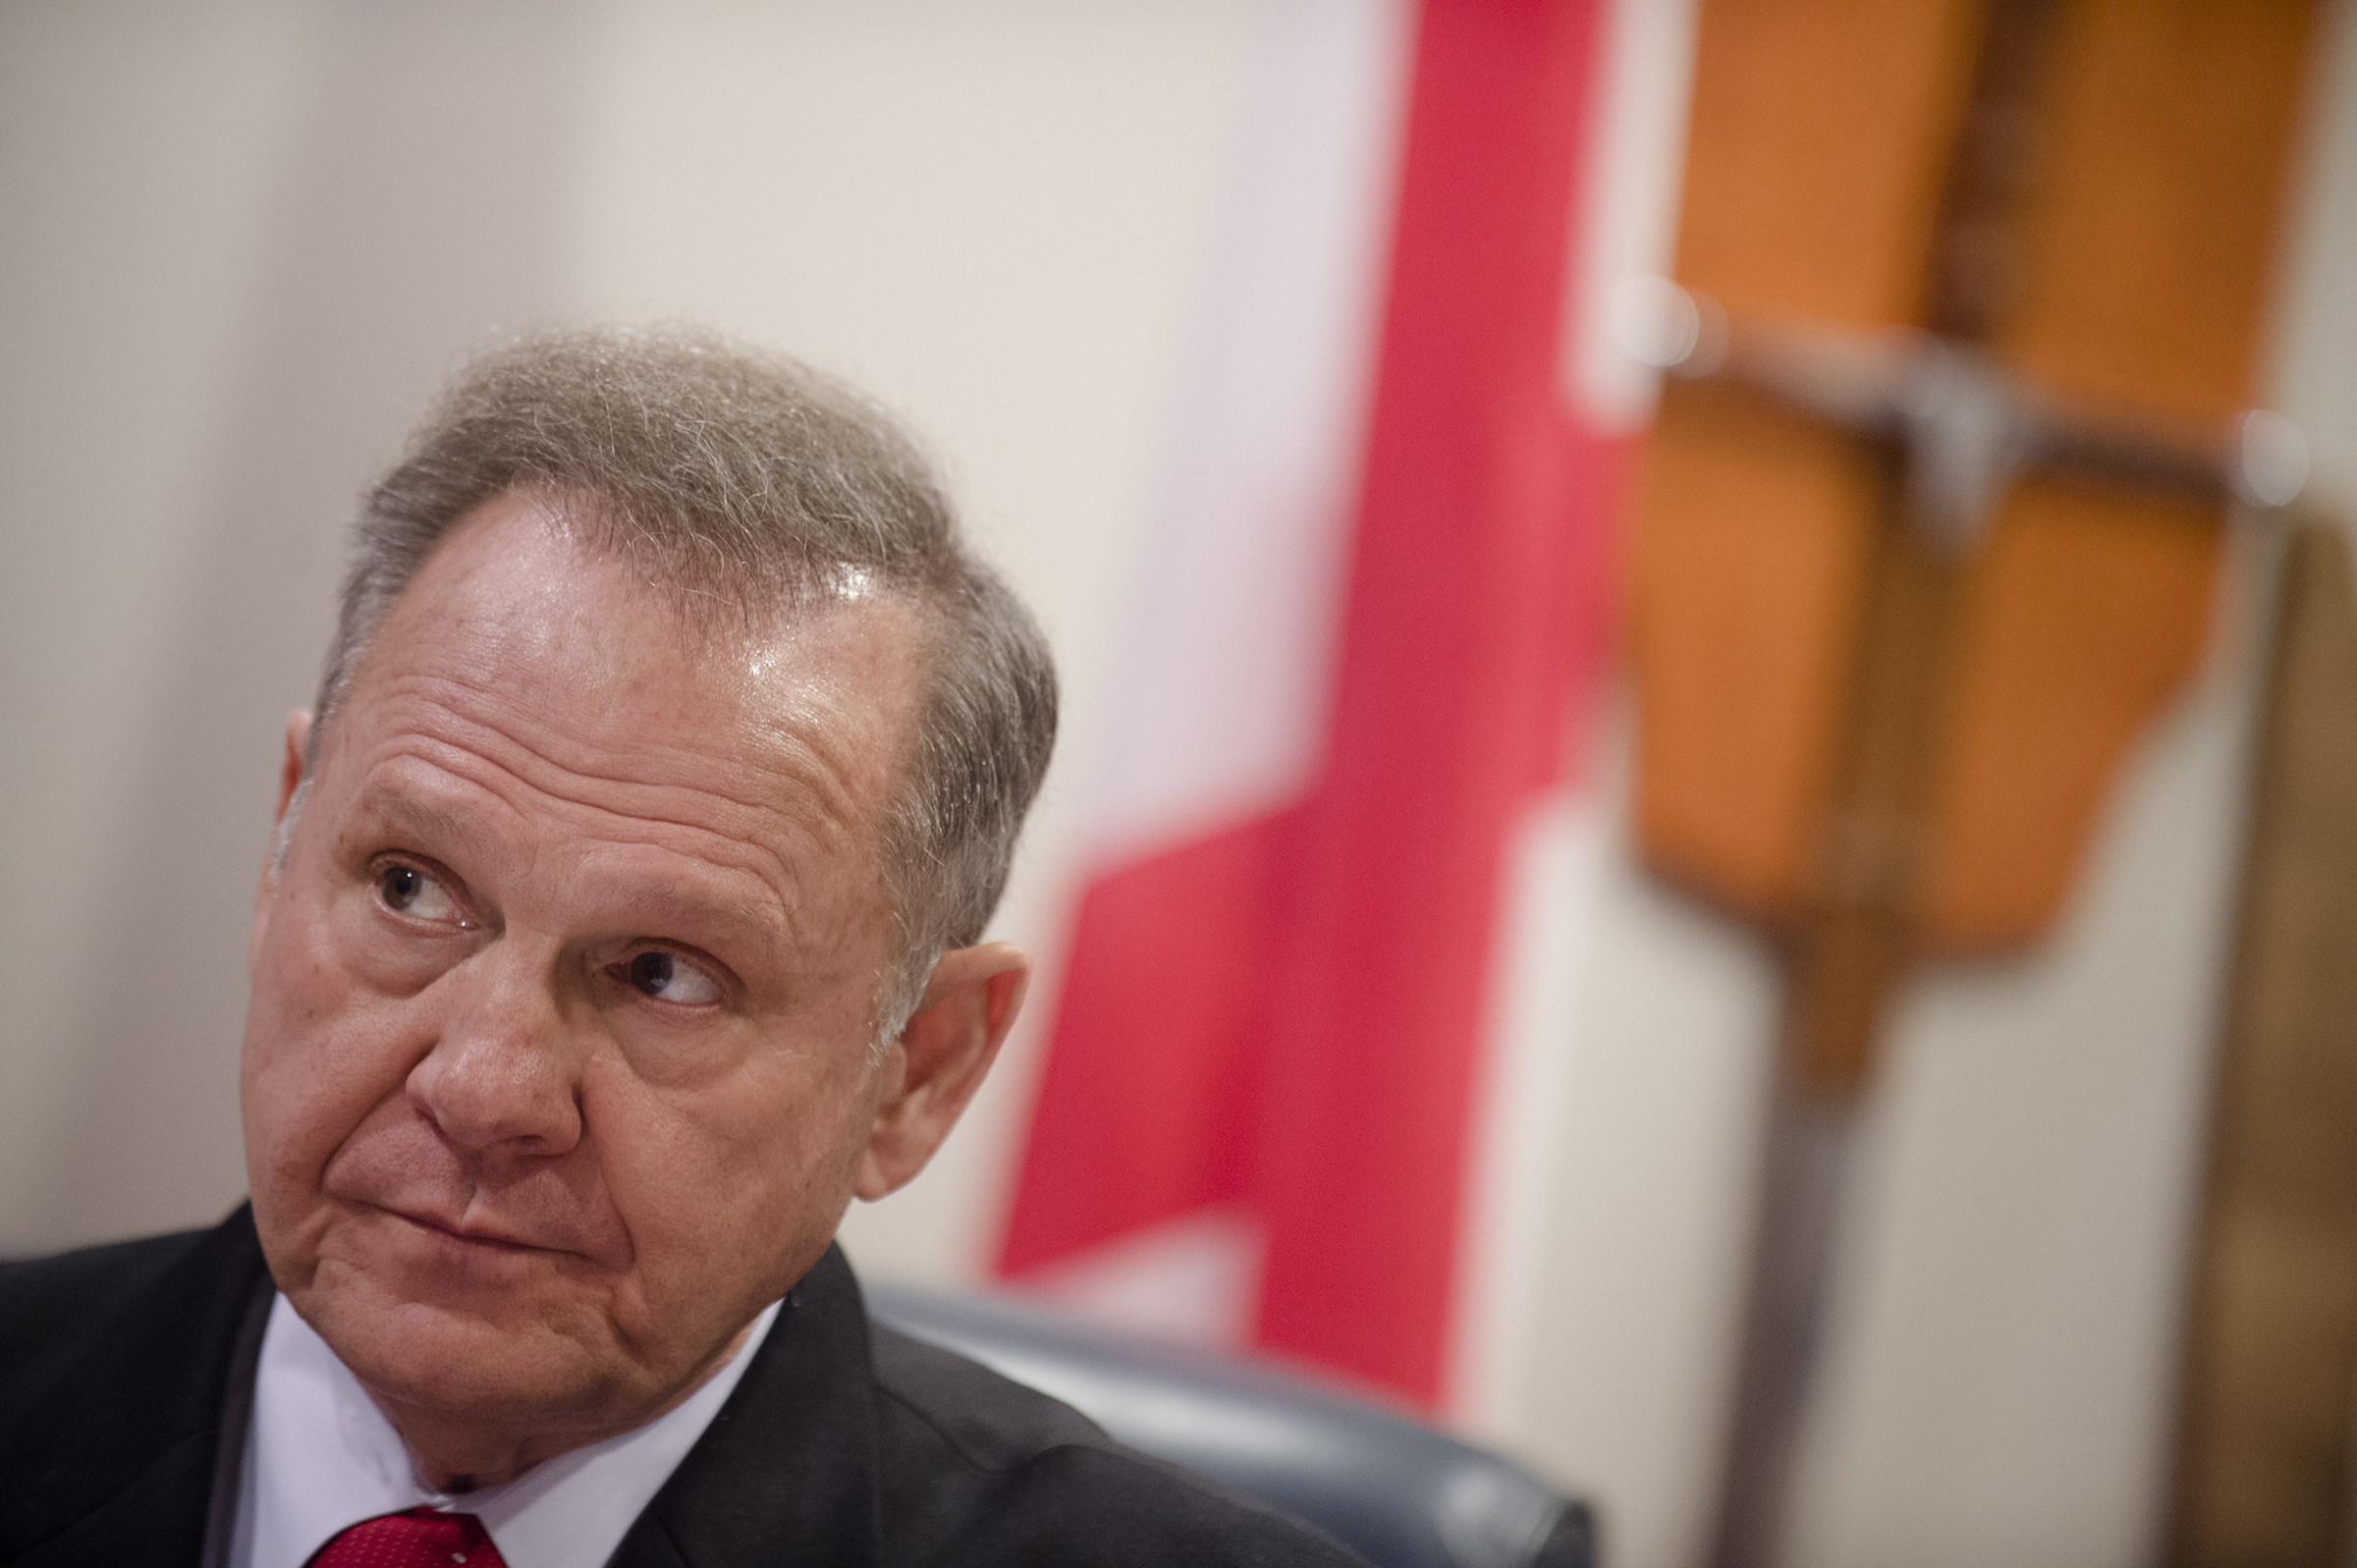 Alabama Chief Justice Roy Moore talks about his administrative order discouraging probate judges from issuing same sex marriage licenses, at the Alabama Supreme Court building in Montgomery, Ala. on Jan. 6, 2016. (Albert Cesare—AP)